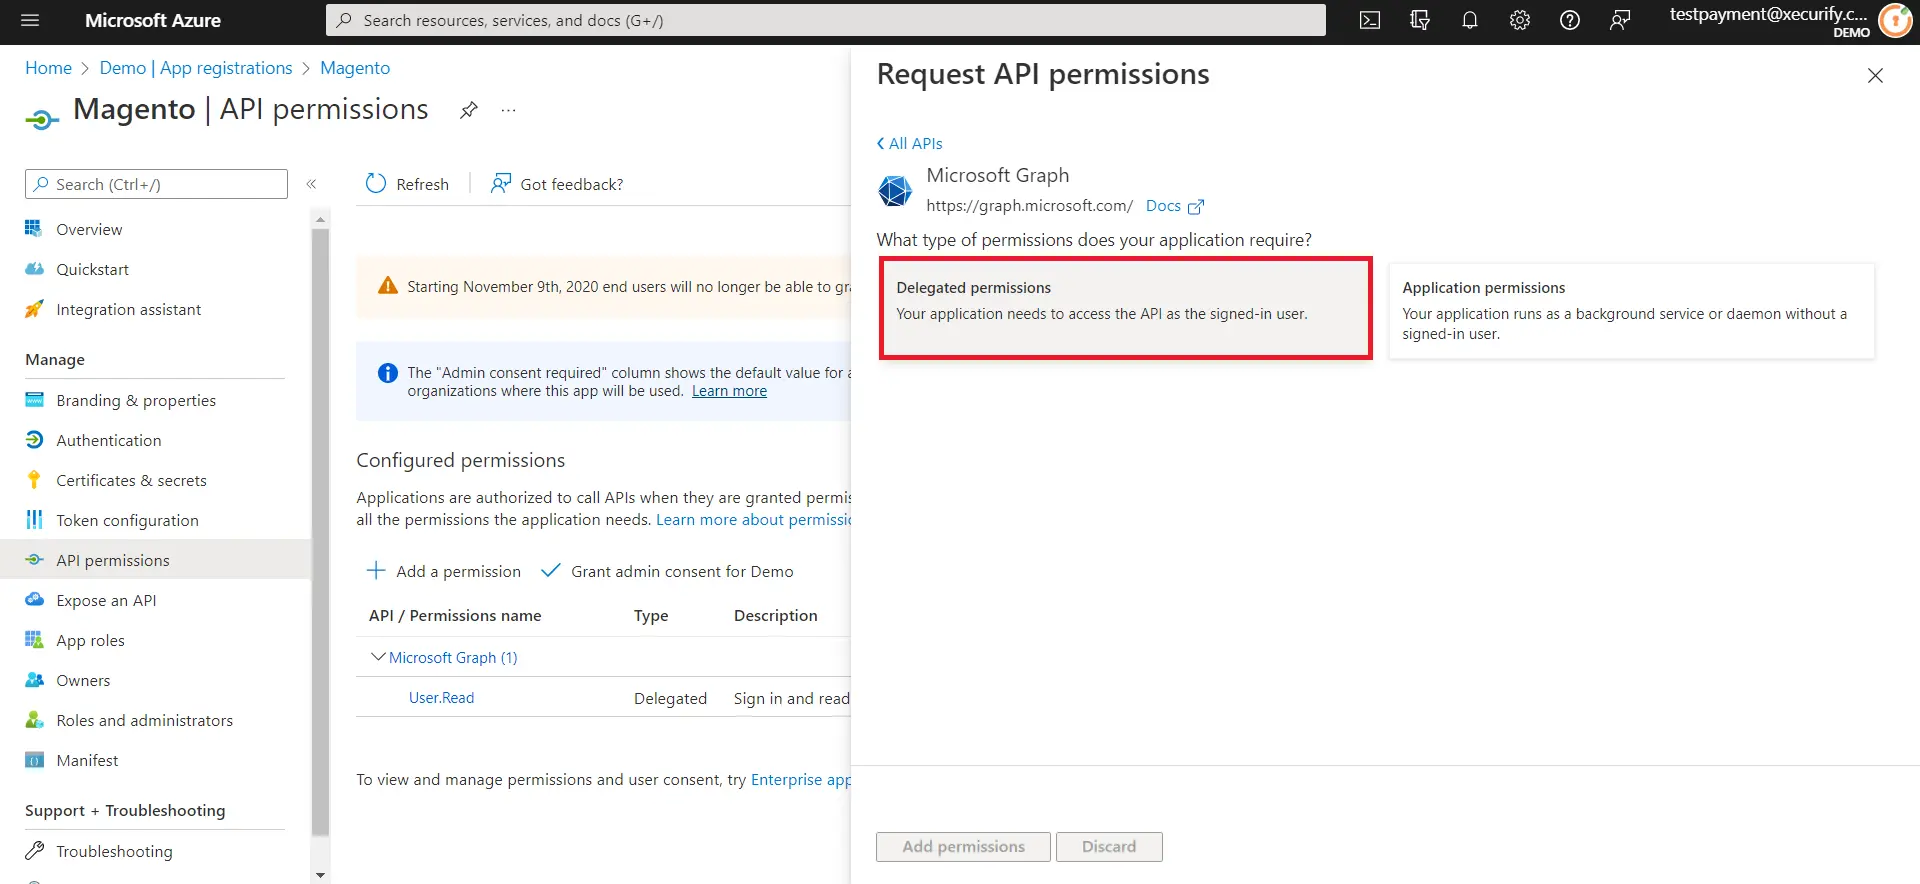 Magento SSO Azure AD Single Sign-on (SSO) Delegated permissions